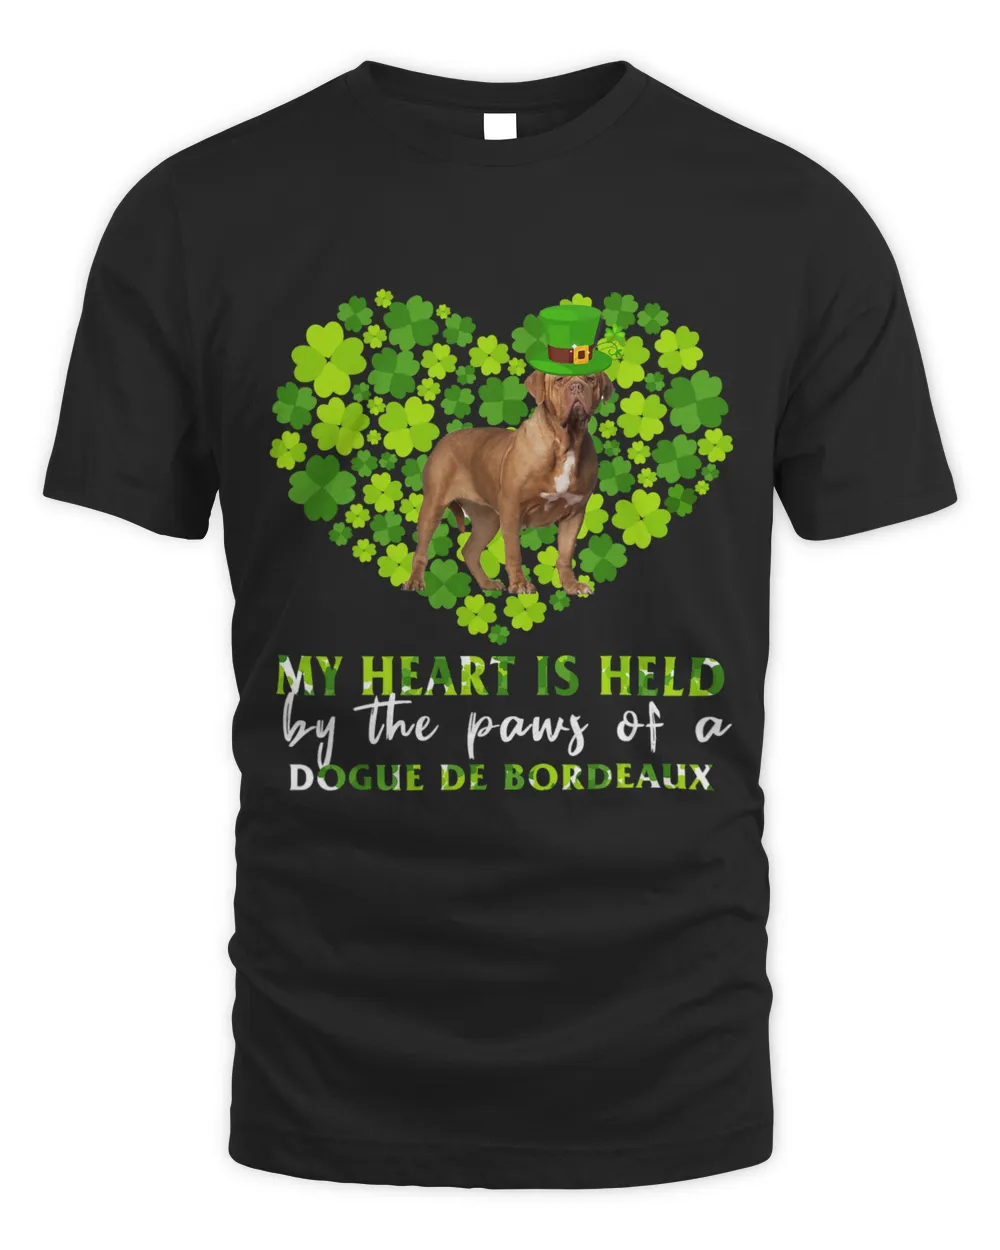 My Heart Is Held By The Paws Of A Dogue de Bordeaux Shirt